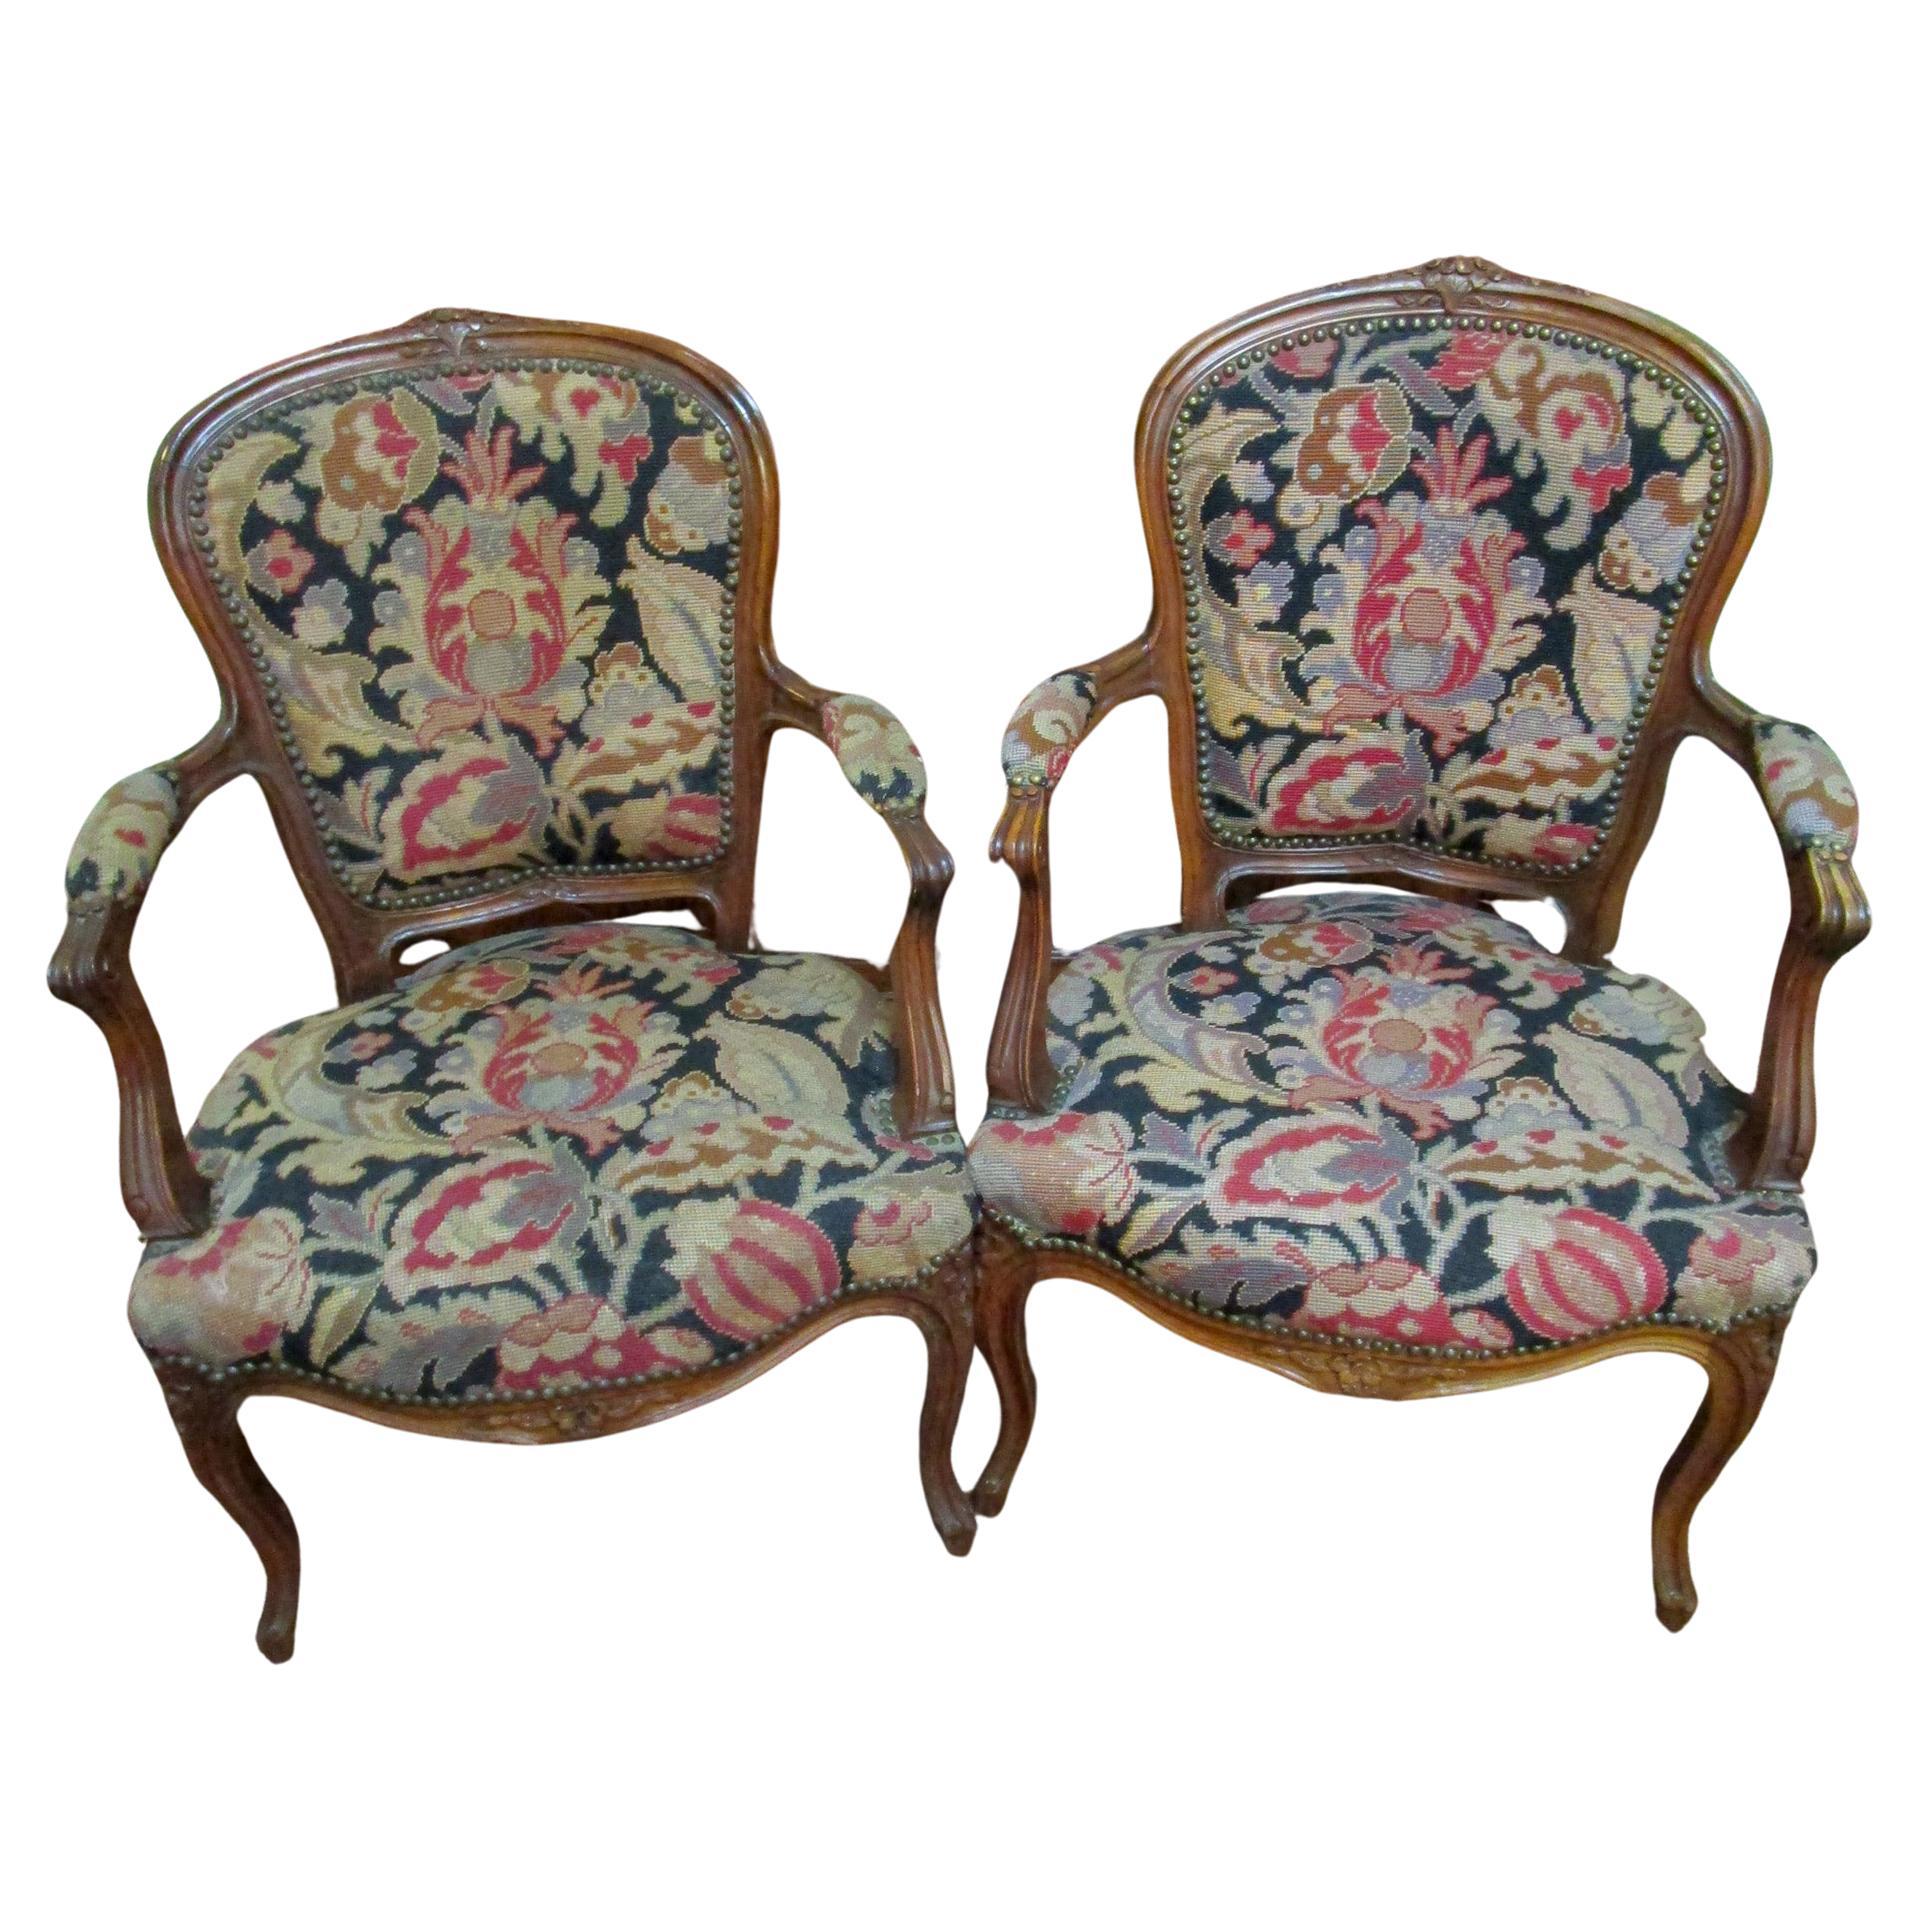 19thc Louis XVI Style Carved Walnut Fauteuils with Needlepoint Upholstery For Sale